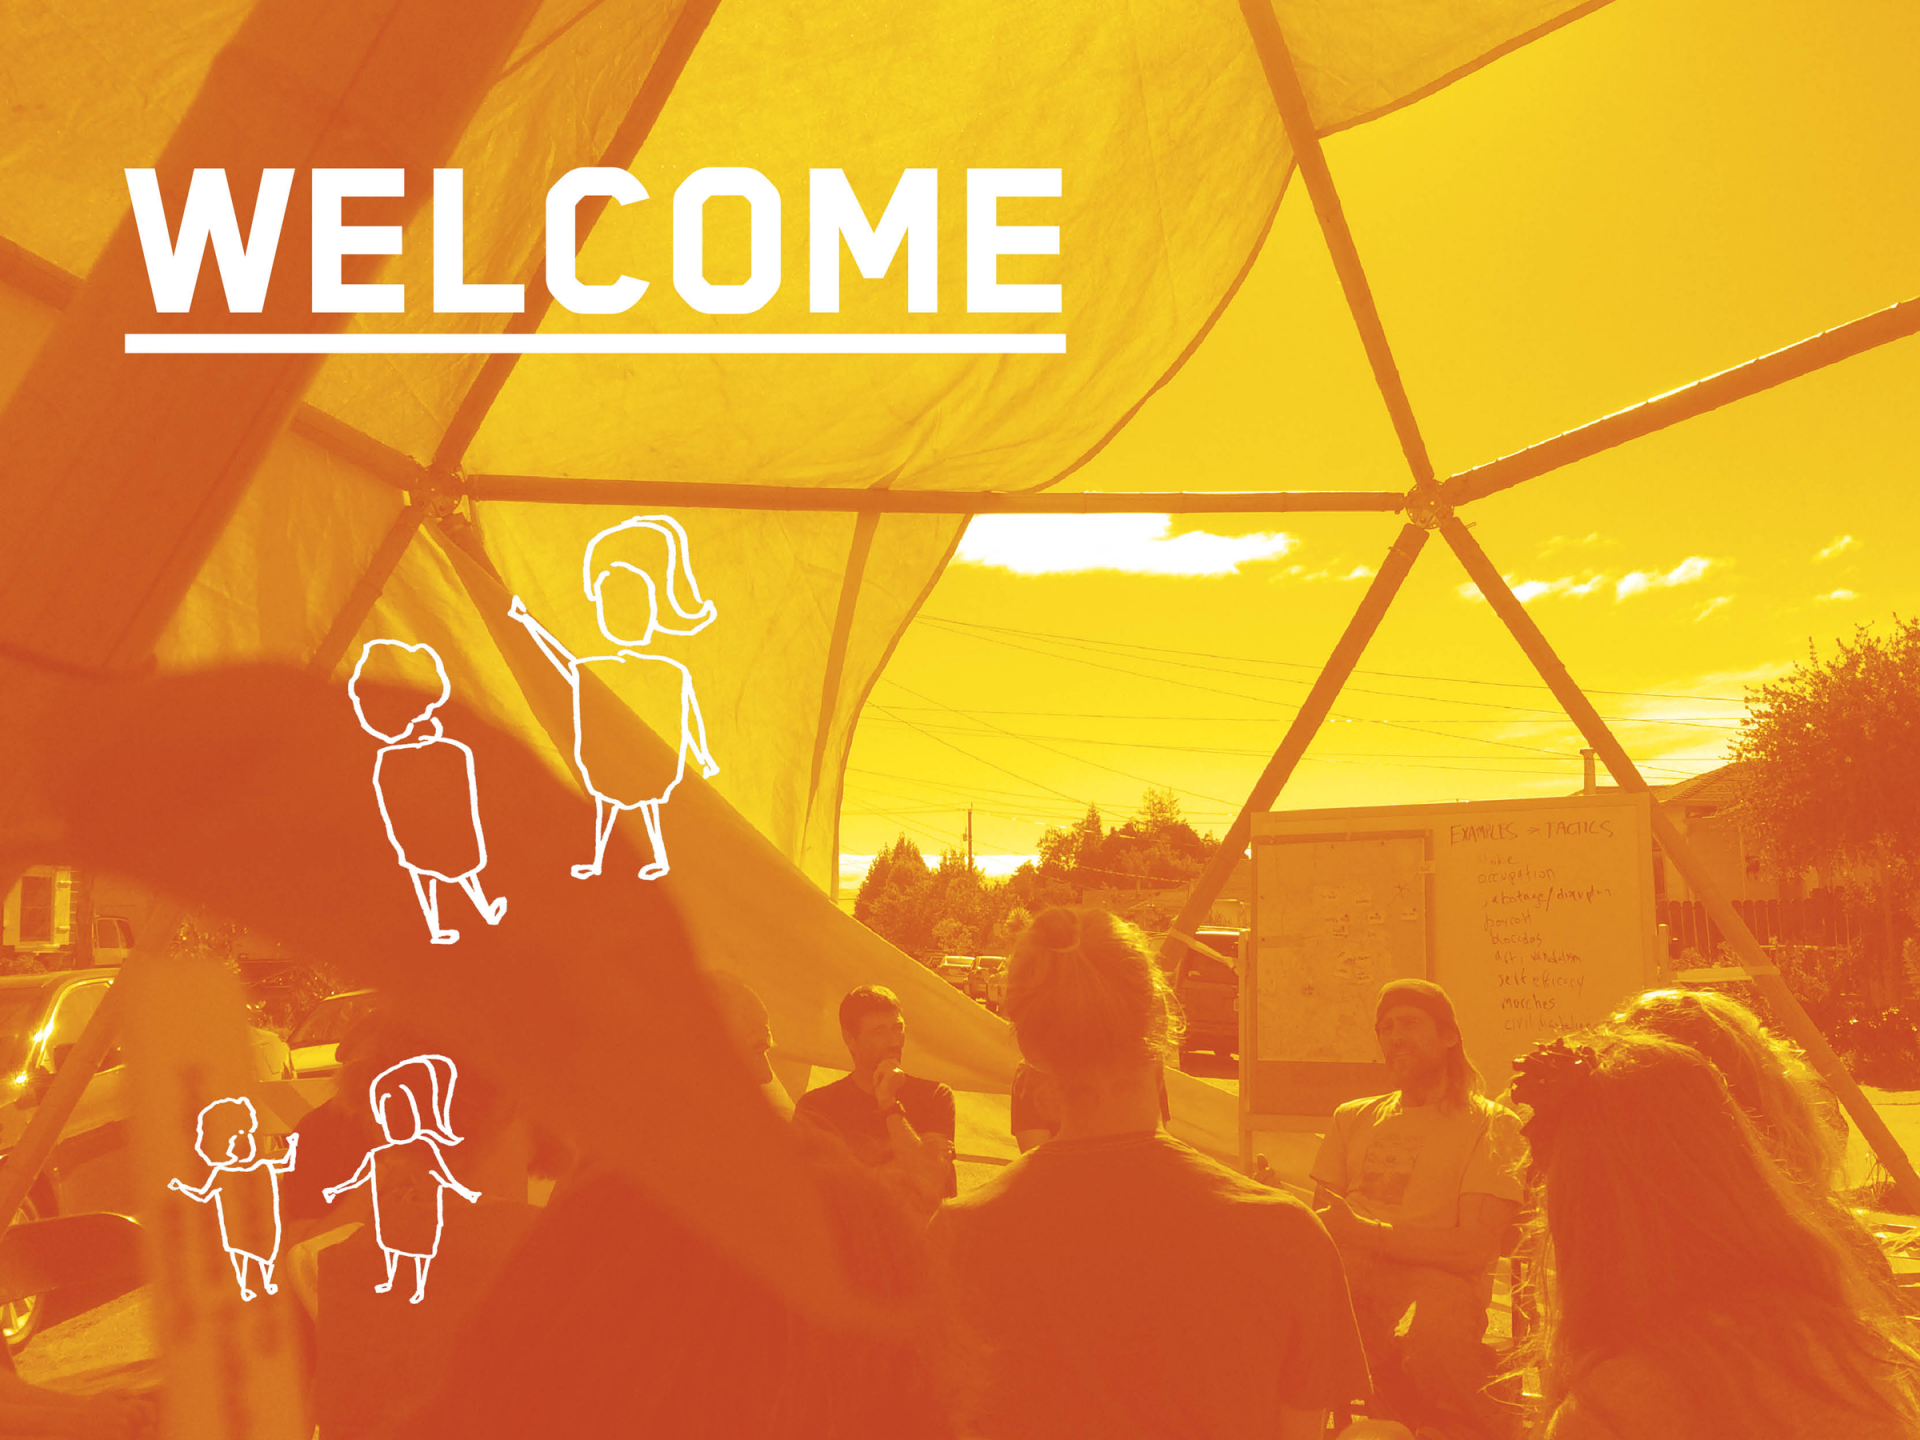 How to Welcome and Engage People in Community Spaces